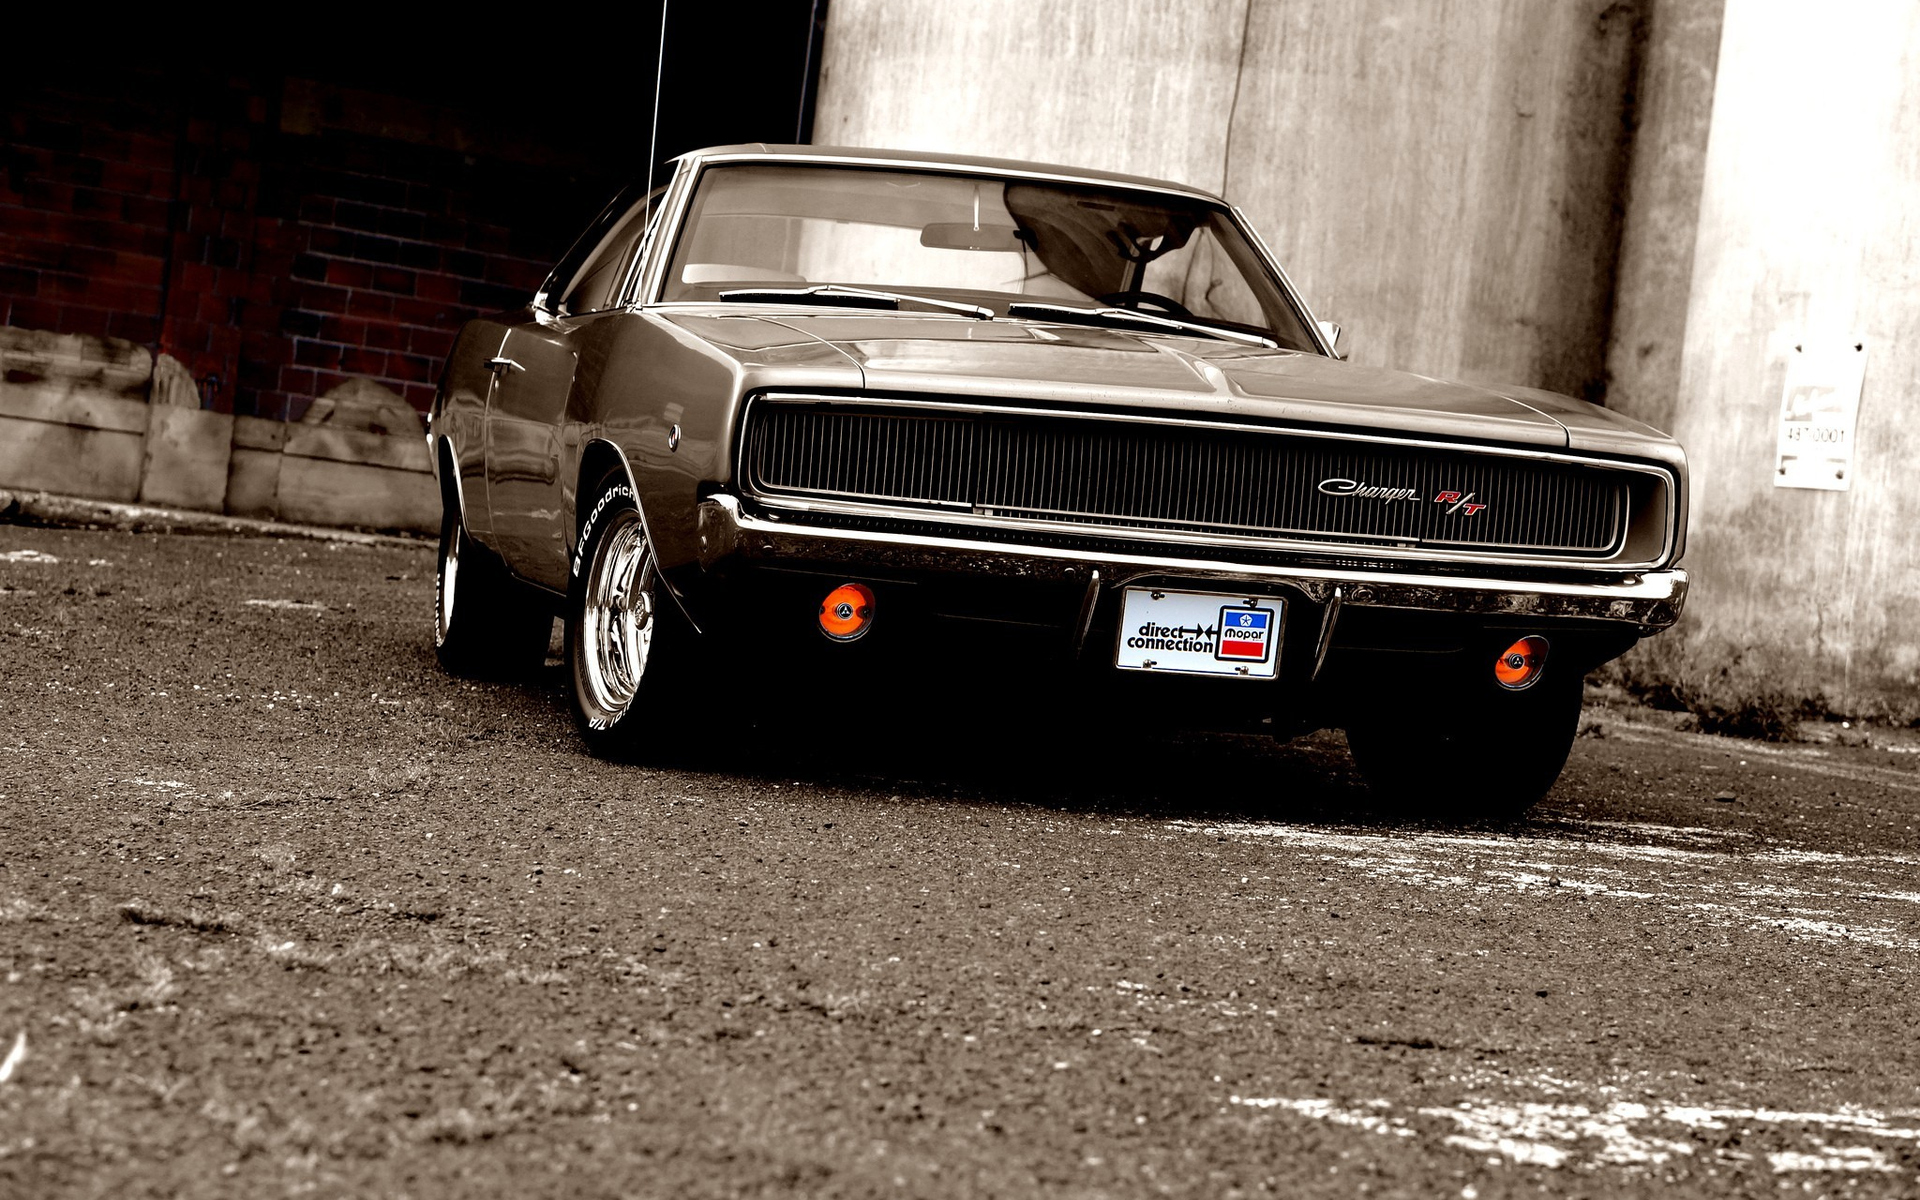 Download wallpapers Dodge Charger 1970 Muscle car retro cars red coupe  american classic cars Dodge for desktop free Pictures for desktop free